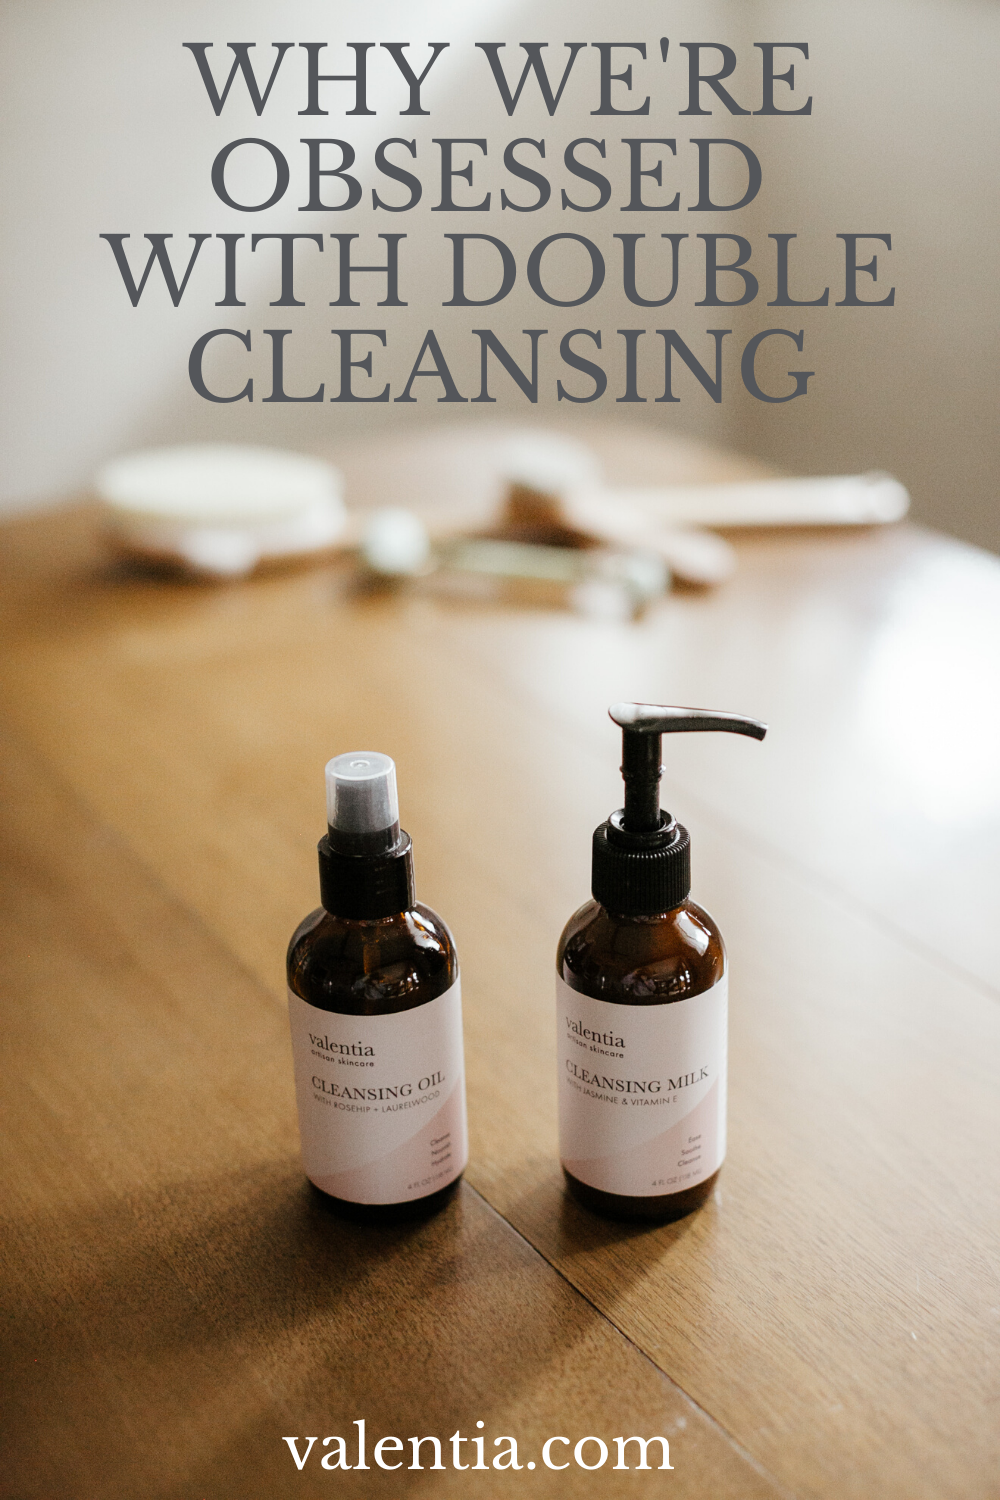 Dermatologists and beauty experts alike are singing the praises of double cleansing—and with the benefits this skincare ritual provides your skin barrier—we’re positive you’ll find that this method is much more than a trend. | Double cleansing is like giving your water-based facial cleanser a powerful boost—allowing its antioxidants, nutrients, and other beneficial ingredients to really reach your skin and work their magic to keep your complexion clear, bright, and healthy. | Valentia Artisan Skincare